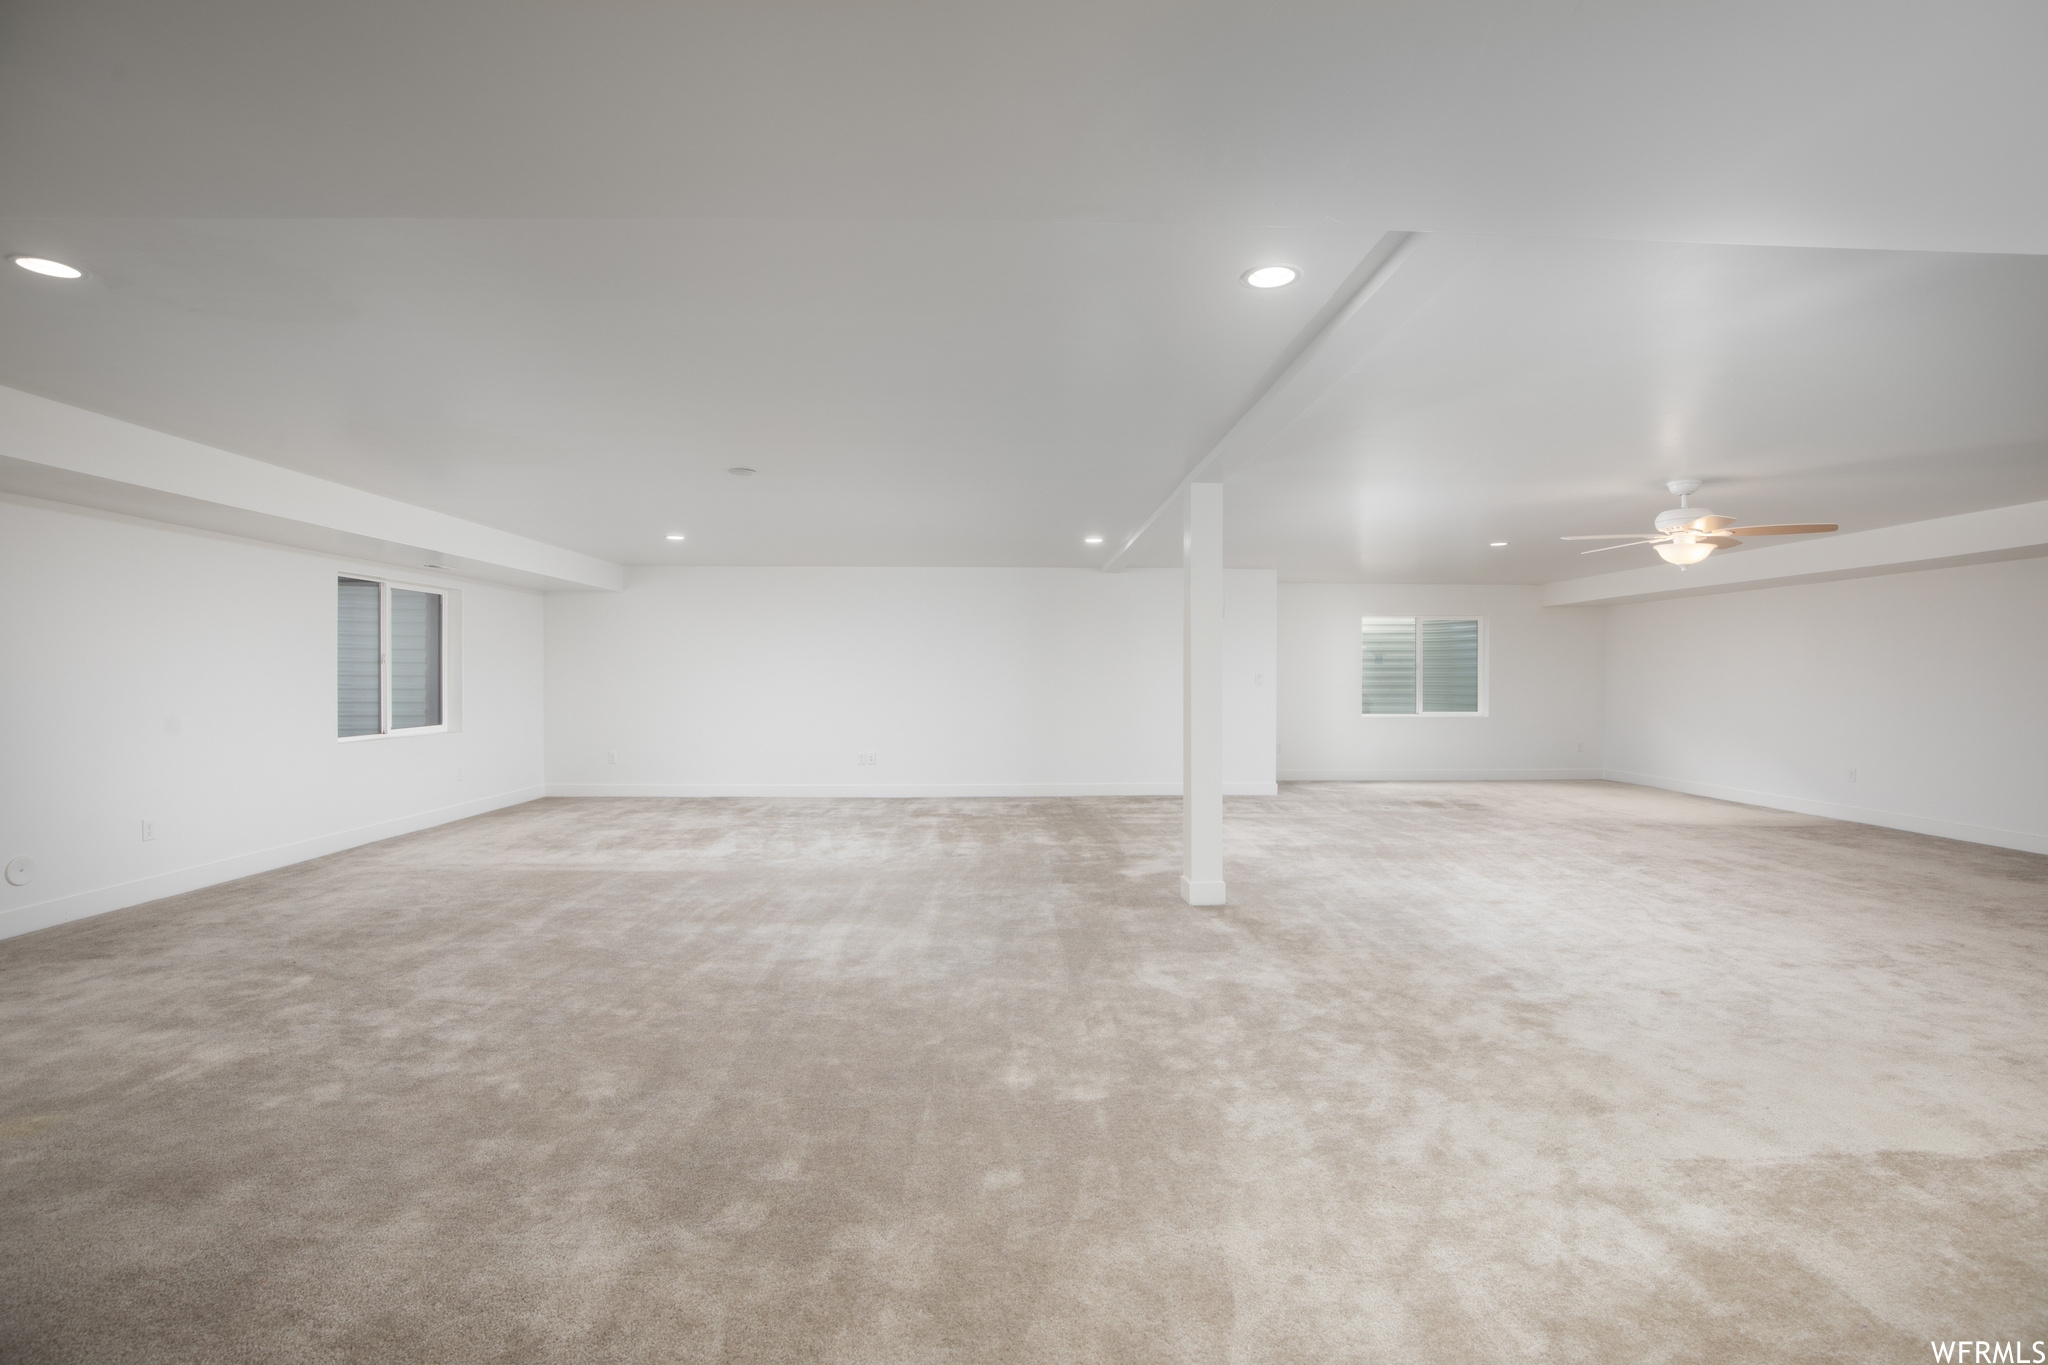 Basement with ceiling fan and light colored carpet